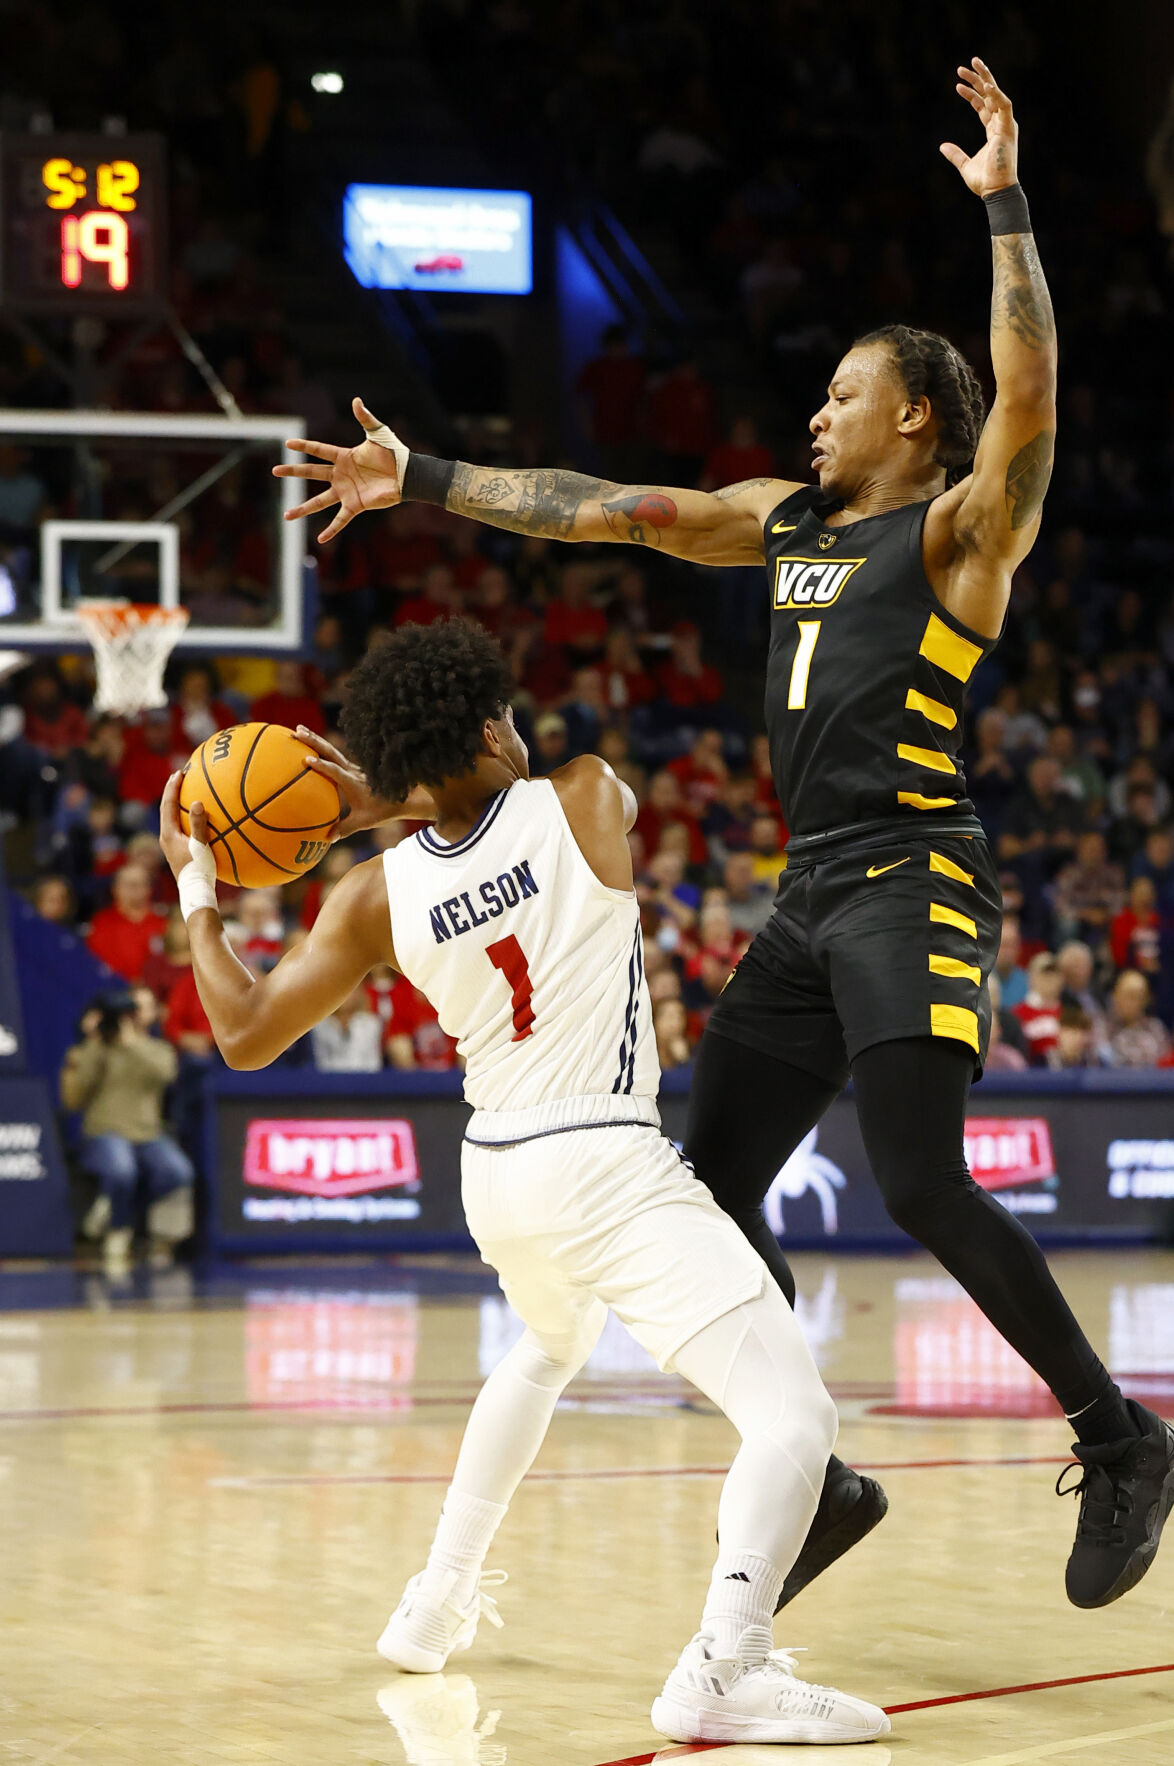 Theyre like sharks VCU uses second-half run to knockout Richmond, continue A-10 ascension